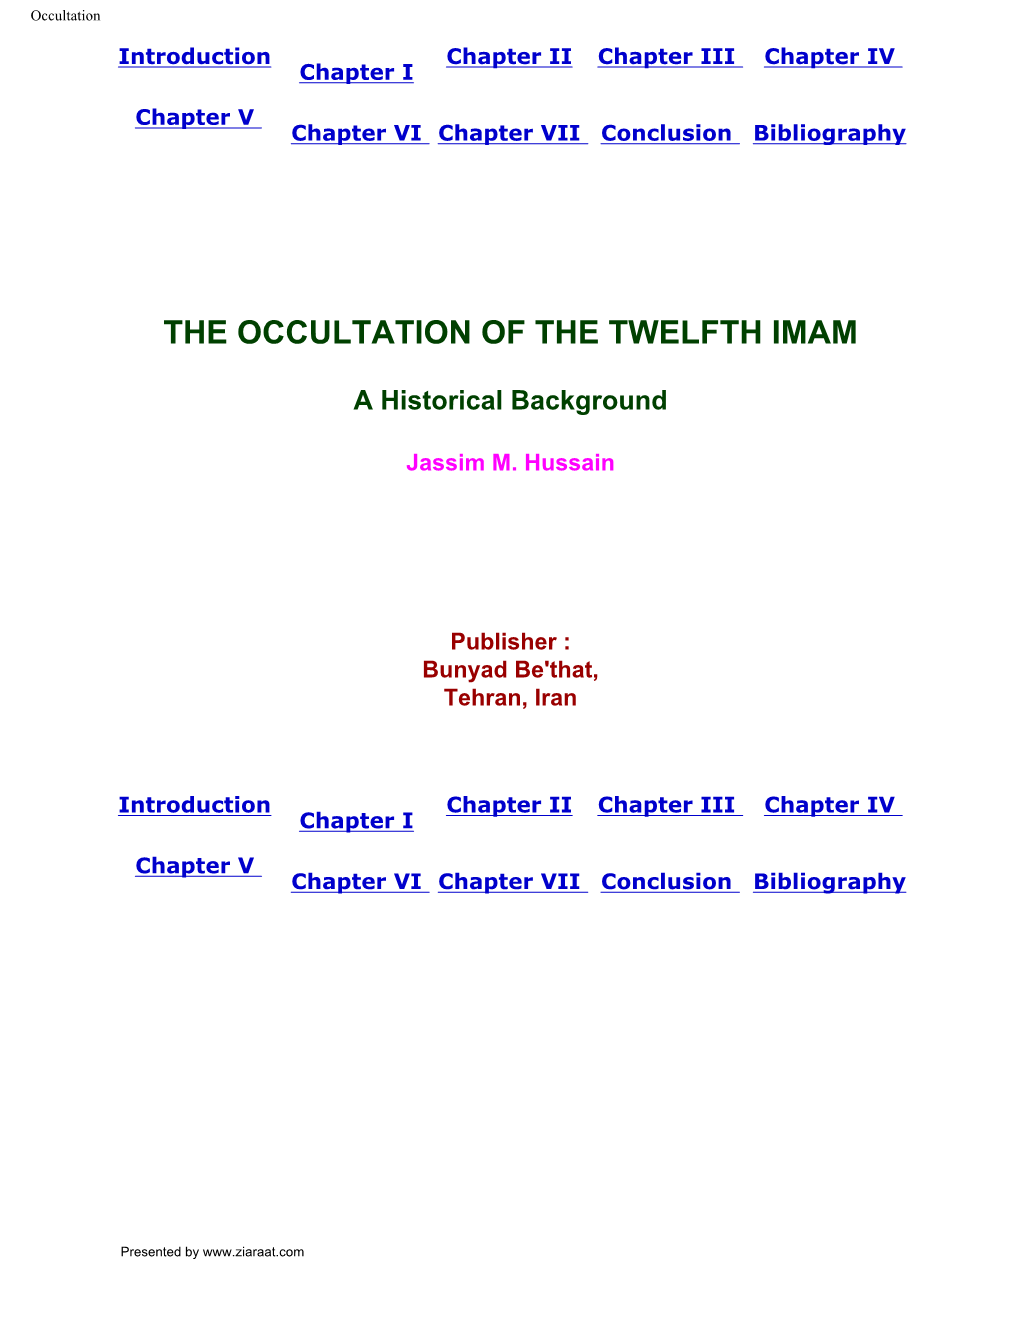 The Occultation of the Twelfth Imam